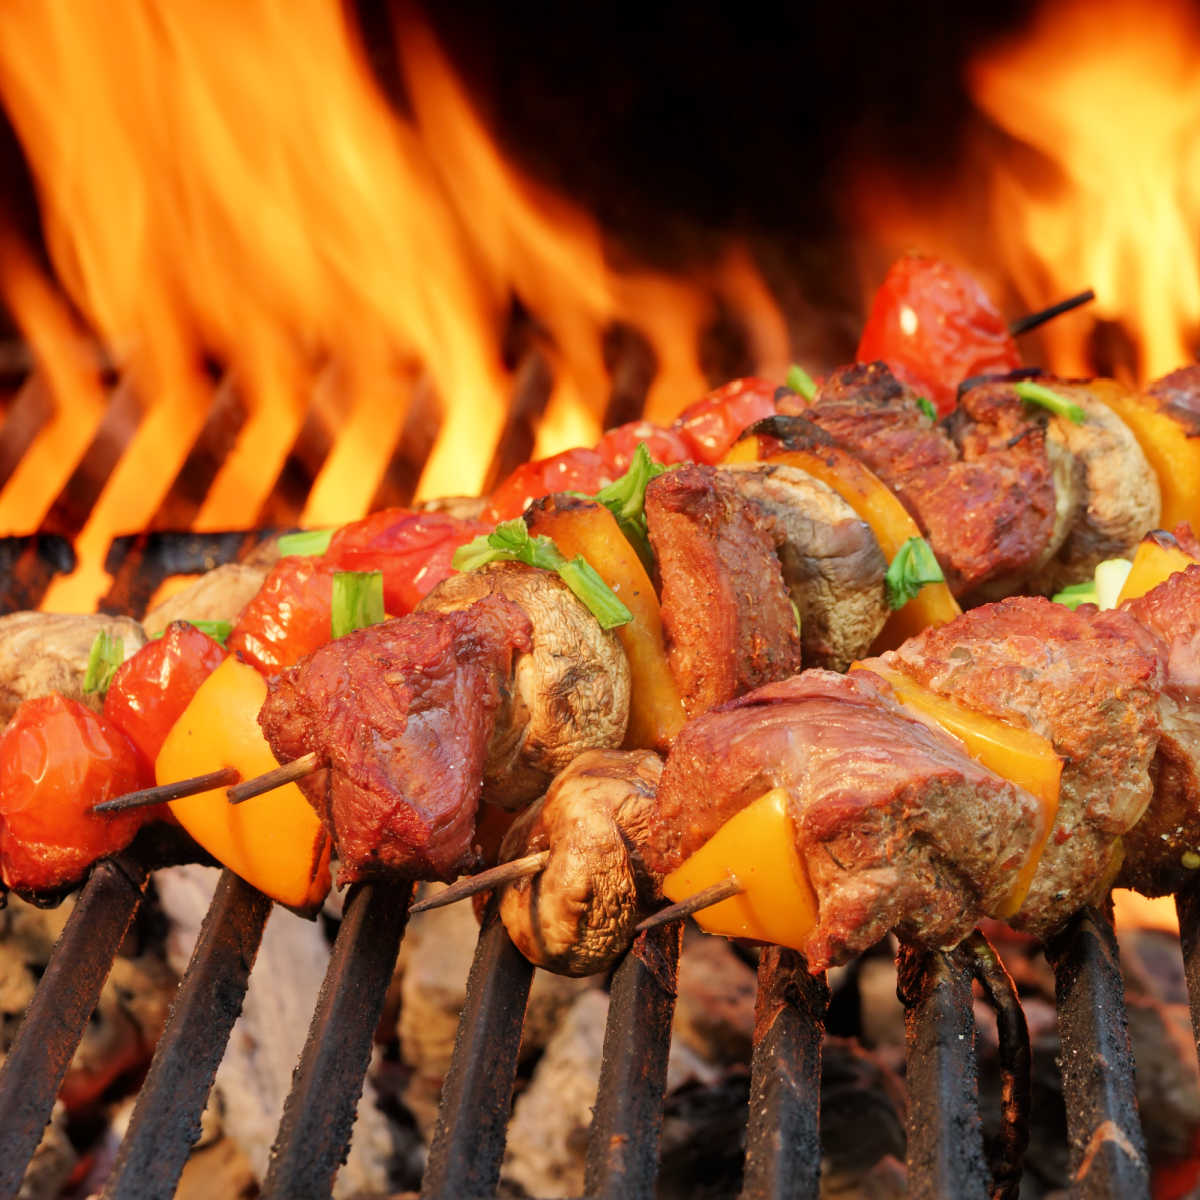 Kebabs on a flaming grill